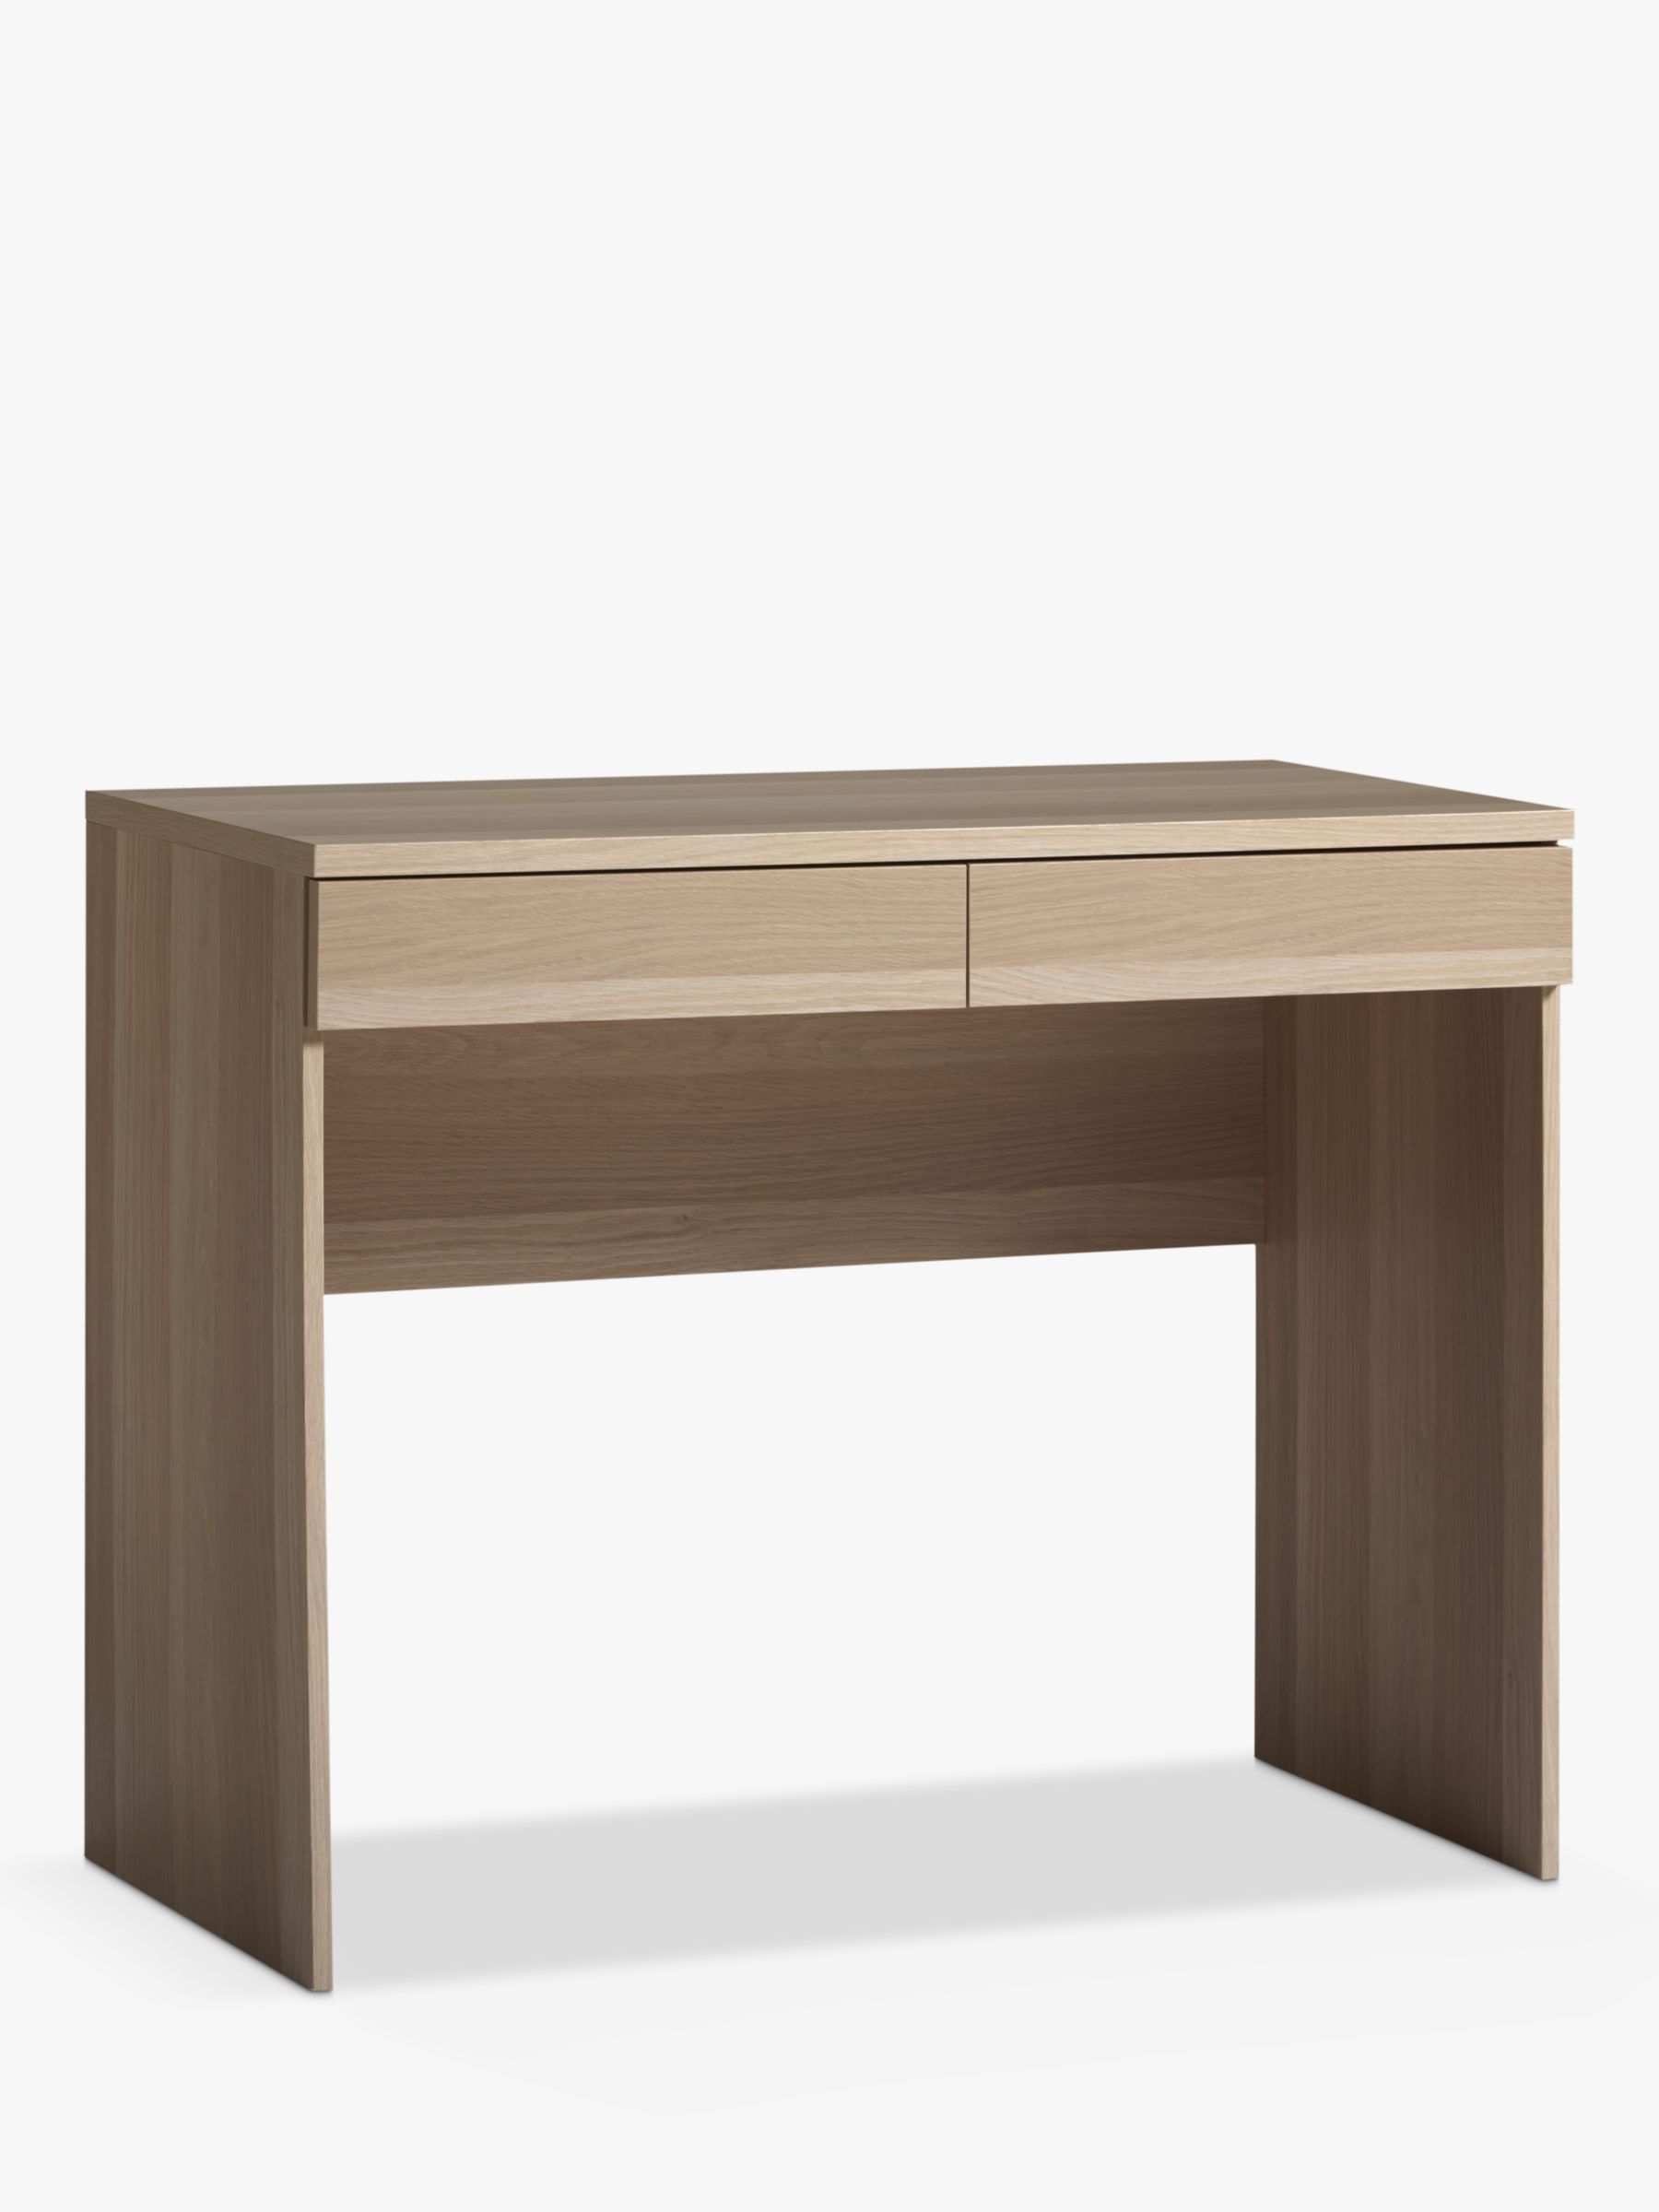 Photo of John lewis anyday mix it dressing table/desk